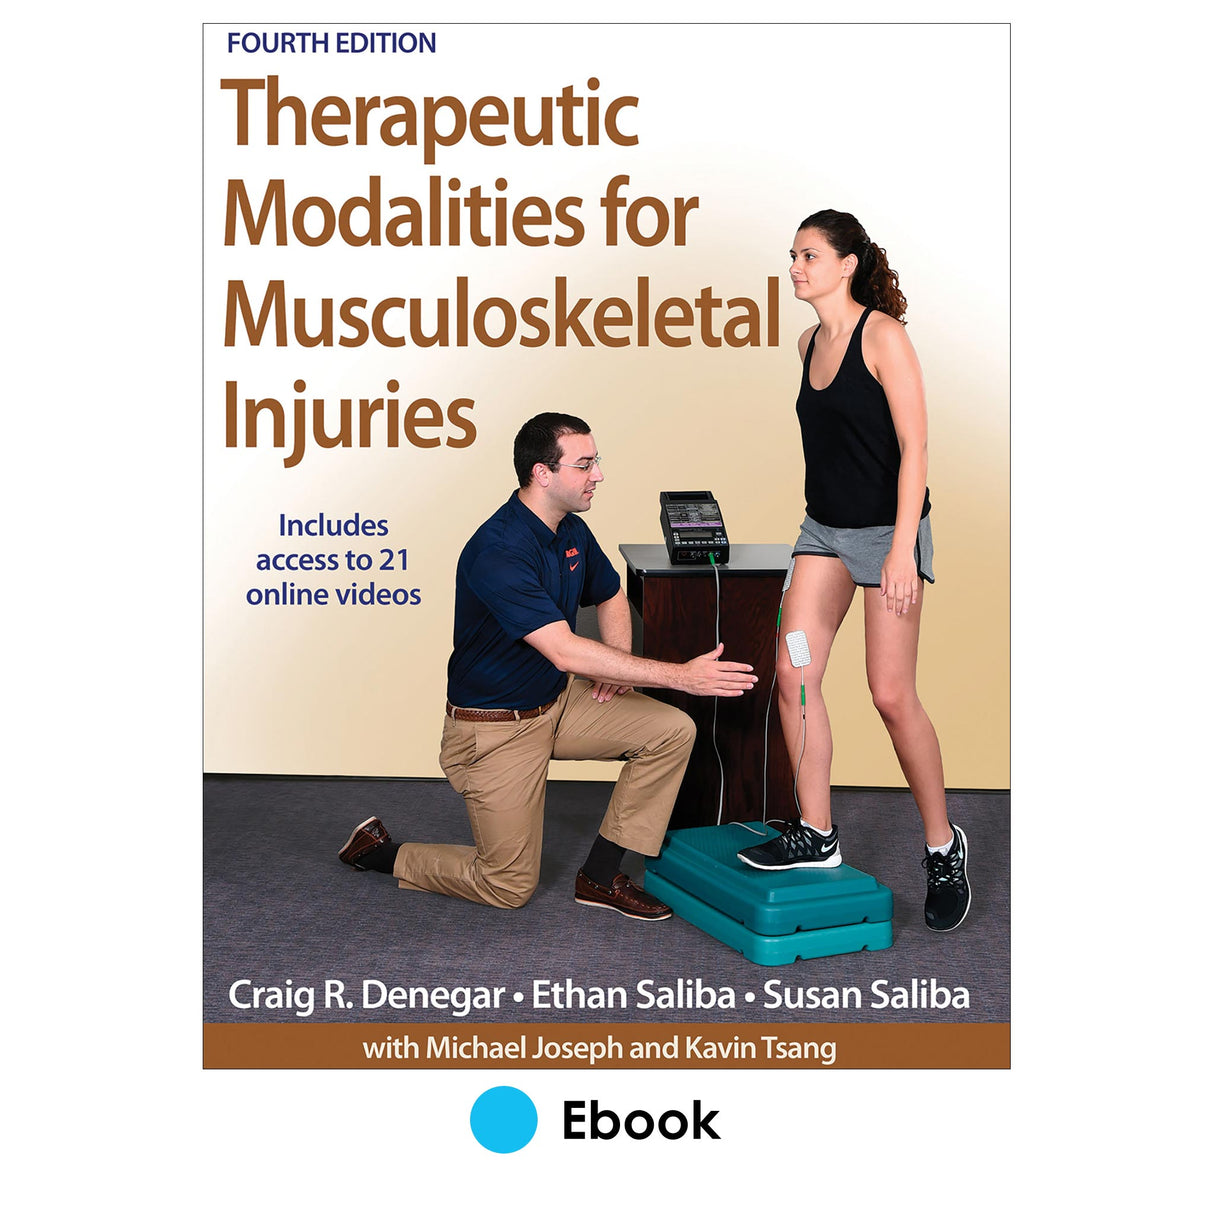 Therapeutic Modalities for Musculoskeletal Injuries 4th Edition PDF With Online Video